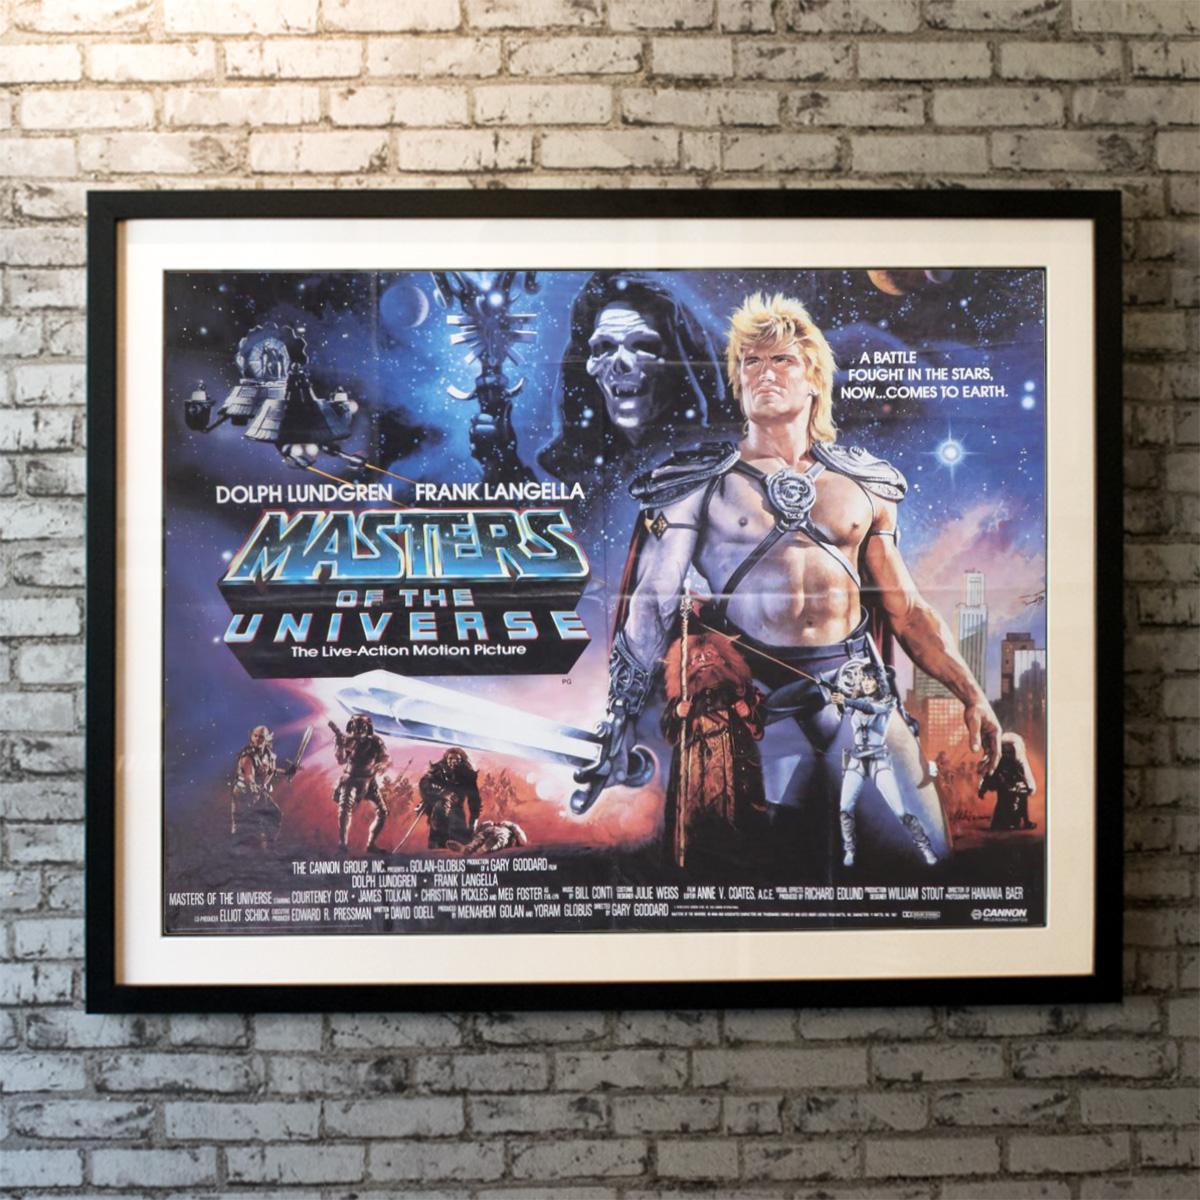 When the evil Skeletor (Frank Langella) finds a mysterious power called the Cosmic Key, he becomes nearly invincible. However, courageous warrior He-Man (Dolph Lundgren) locates inventor Gwildor (Billy Barty), who created the Key and has another